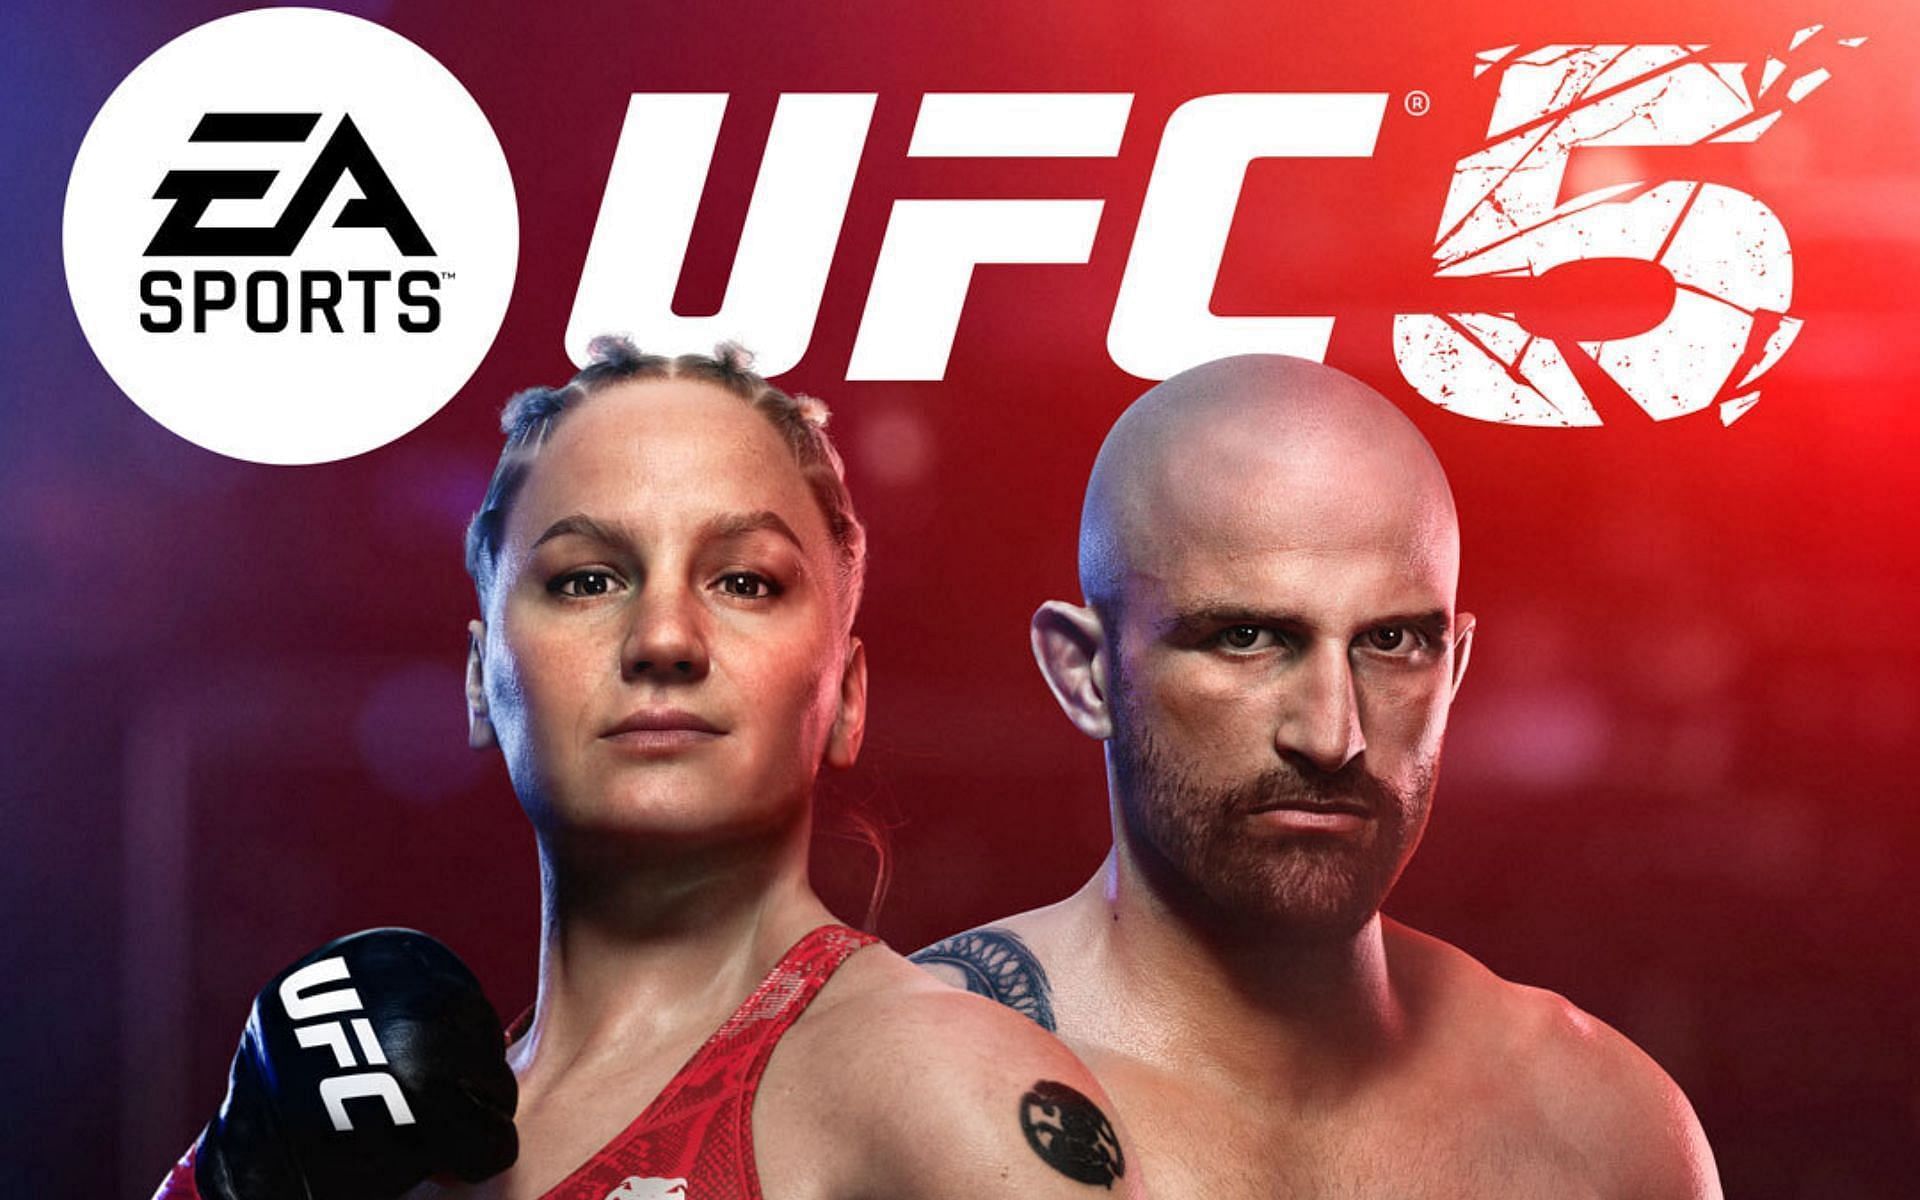 UFC 5 cover [Image credits:@easportsufc on Instagram]